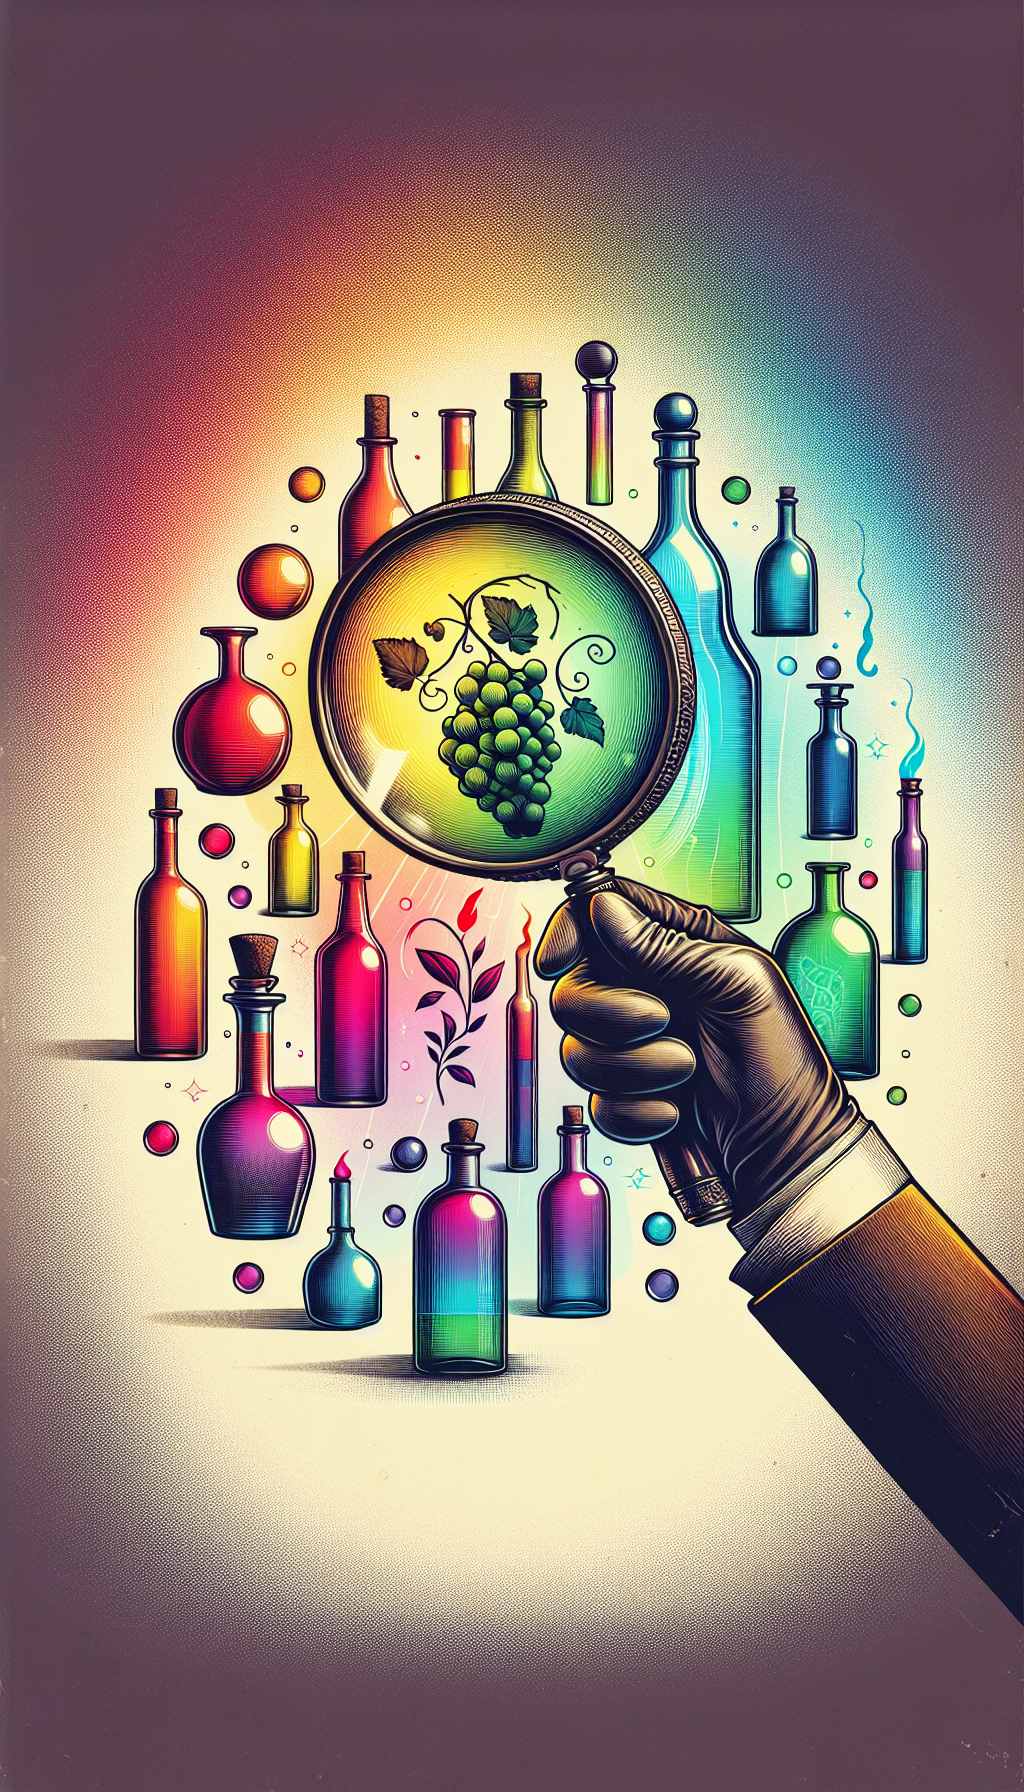 A whimsical illustration features a vintage magnifying glass held by a gloved hand, where the lens reveals a vibrant spectrum across an array of antique bottles lined up like a detective's evidence display. Each bottle casts a distinct hue, hinting at its historical content, as subtle icons (a grape, a leaf, a flame) float within the magnified colors to symbolize their origin stories.